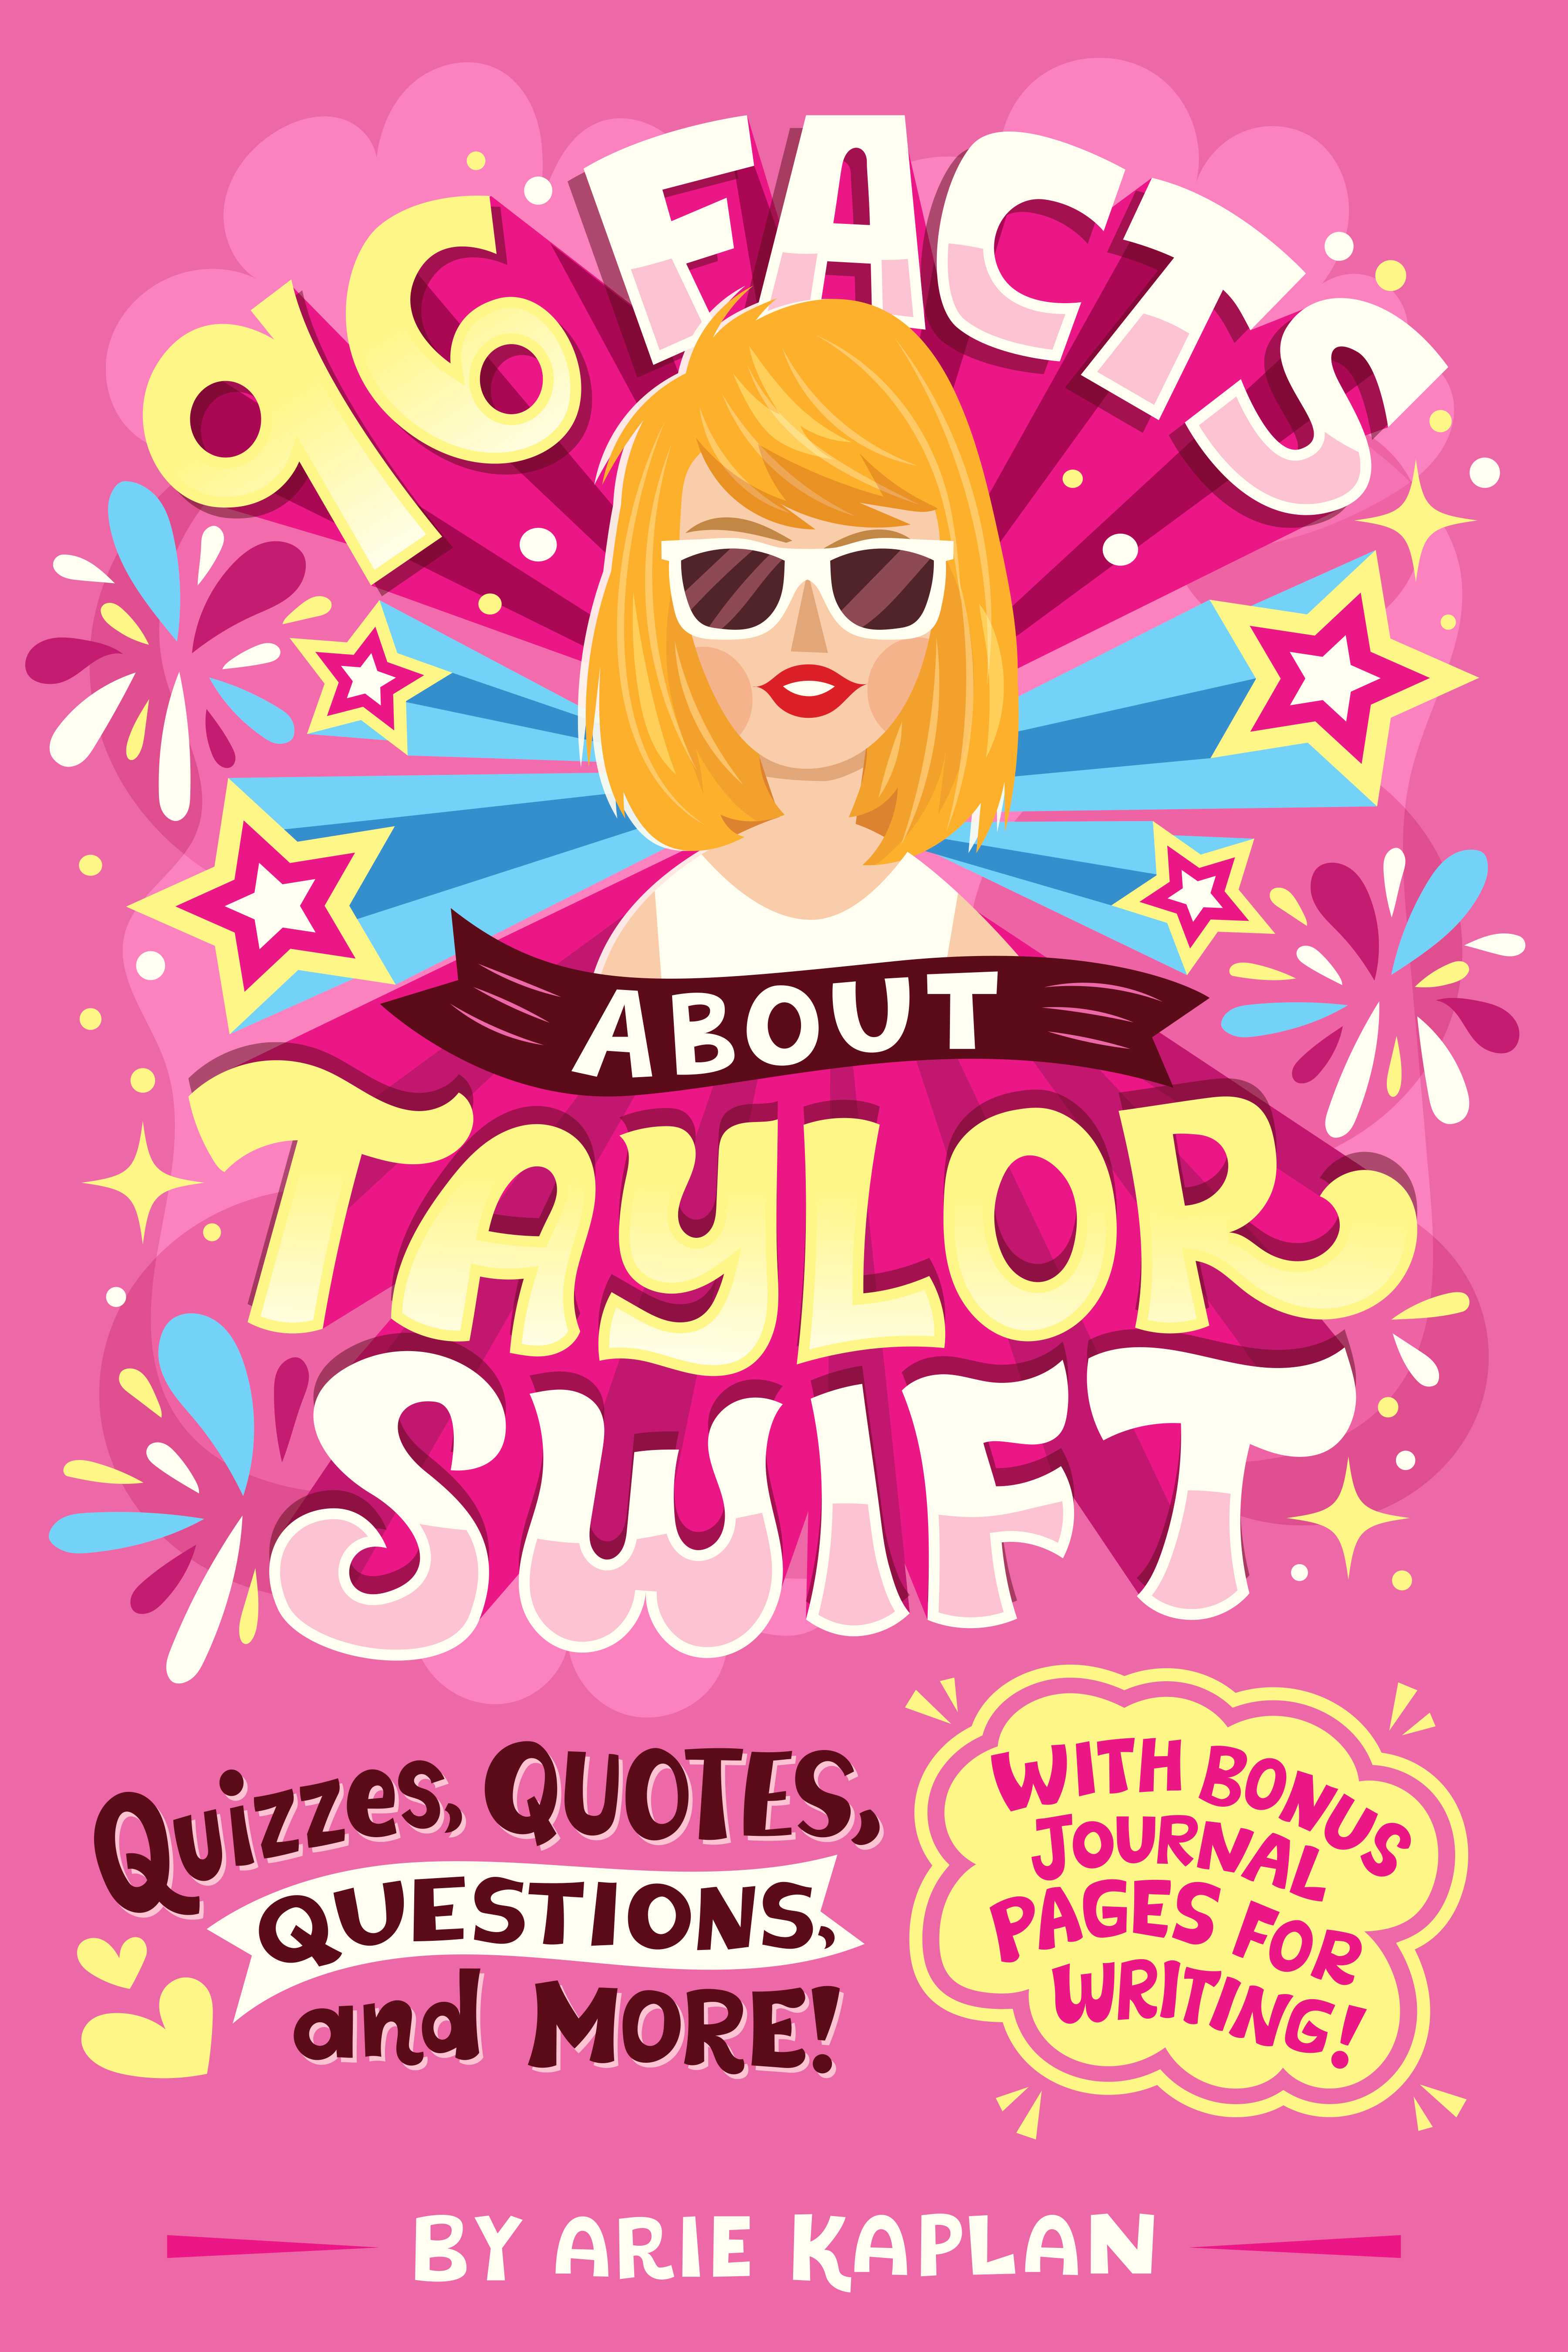 96 Facts About Taylor Swift : Quizzes, Quotes, Questions, and More! With Bonus Journal Pages for Writing! | Kaplan, Arie (Auteur) | Rodil, Risa (Illustrateur)